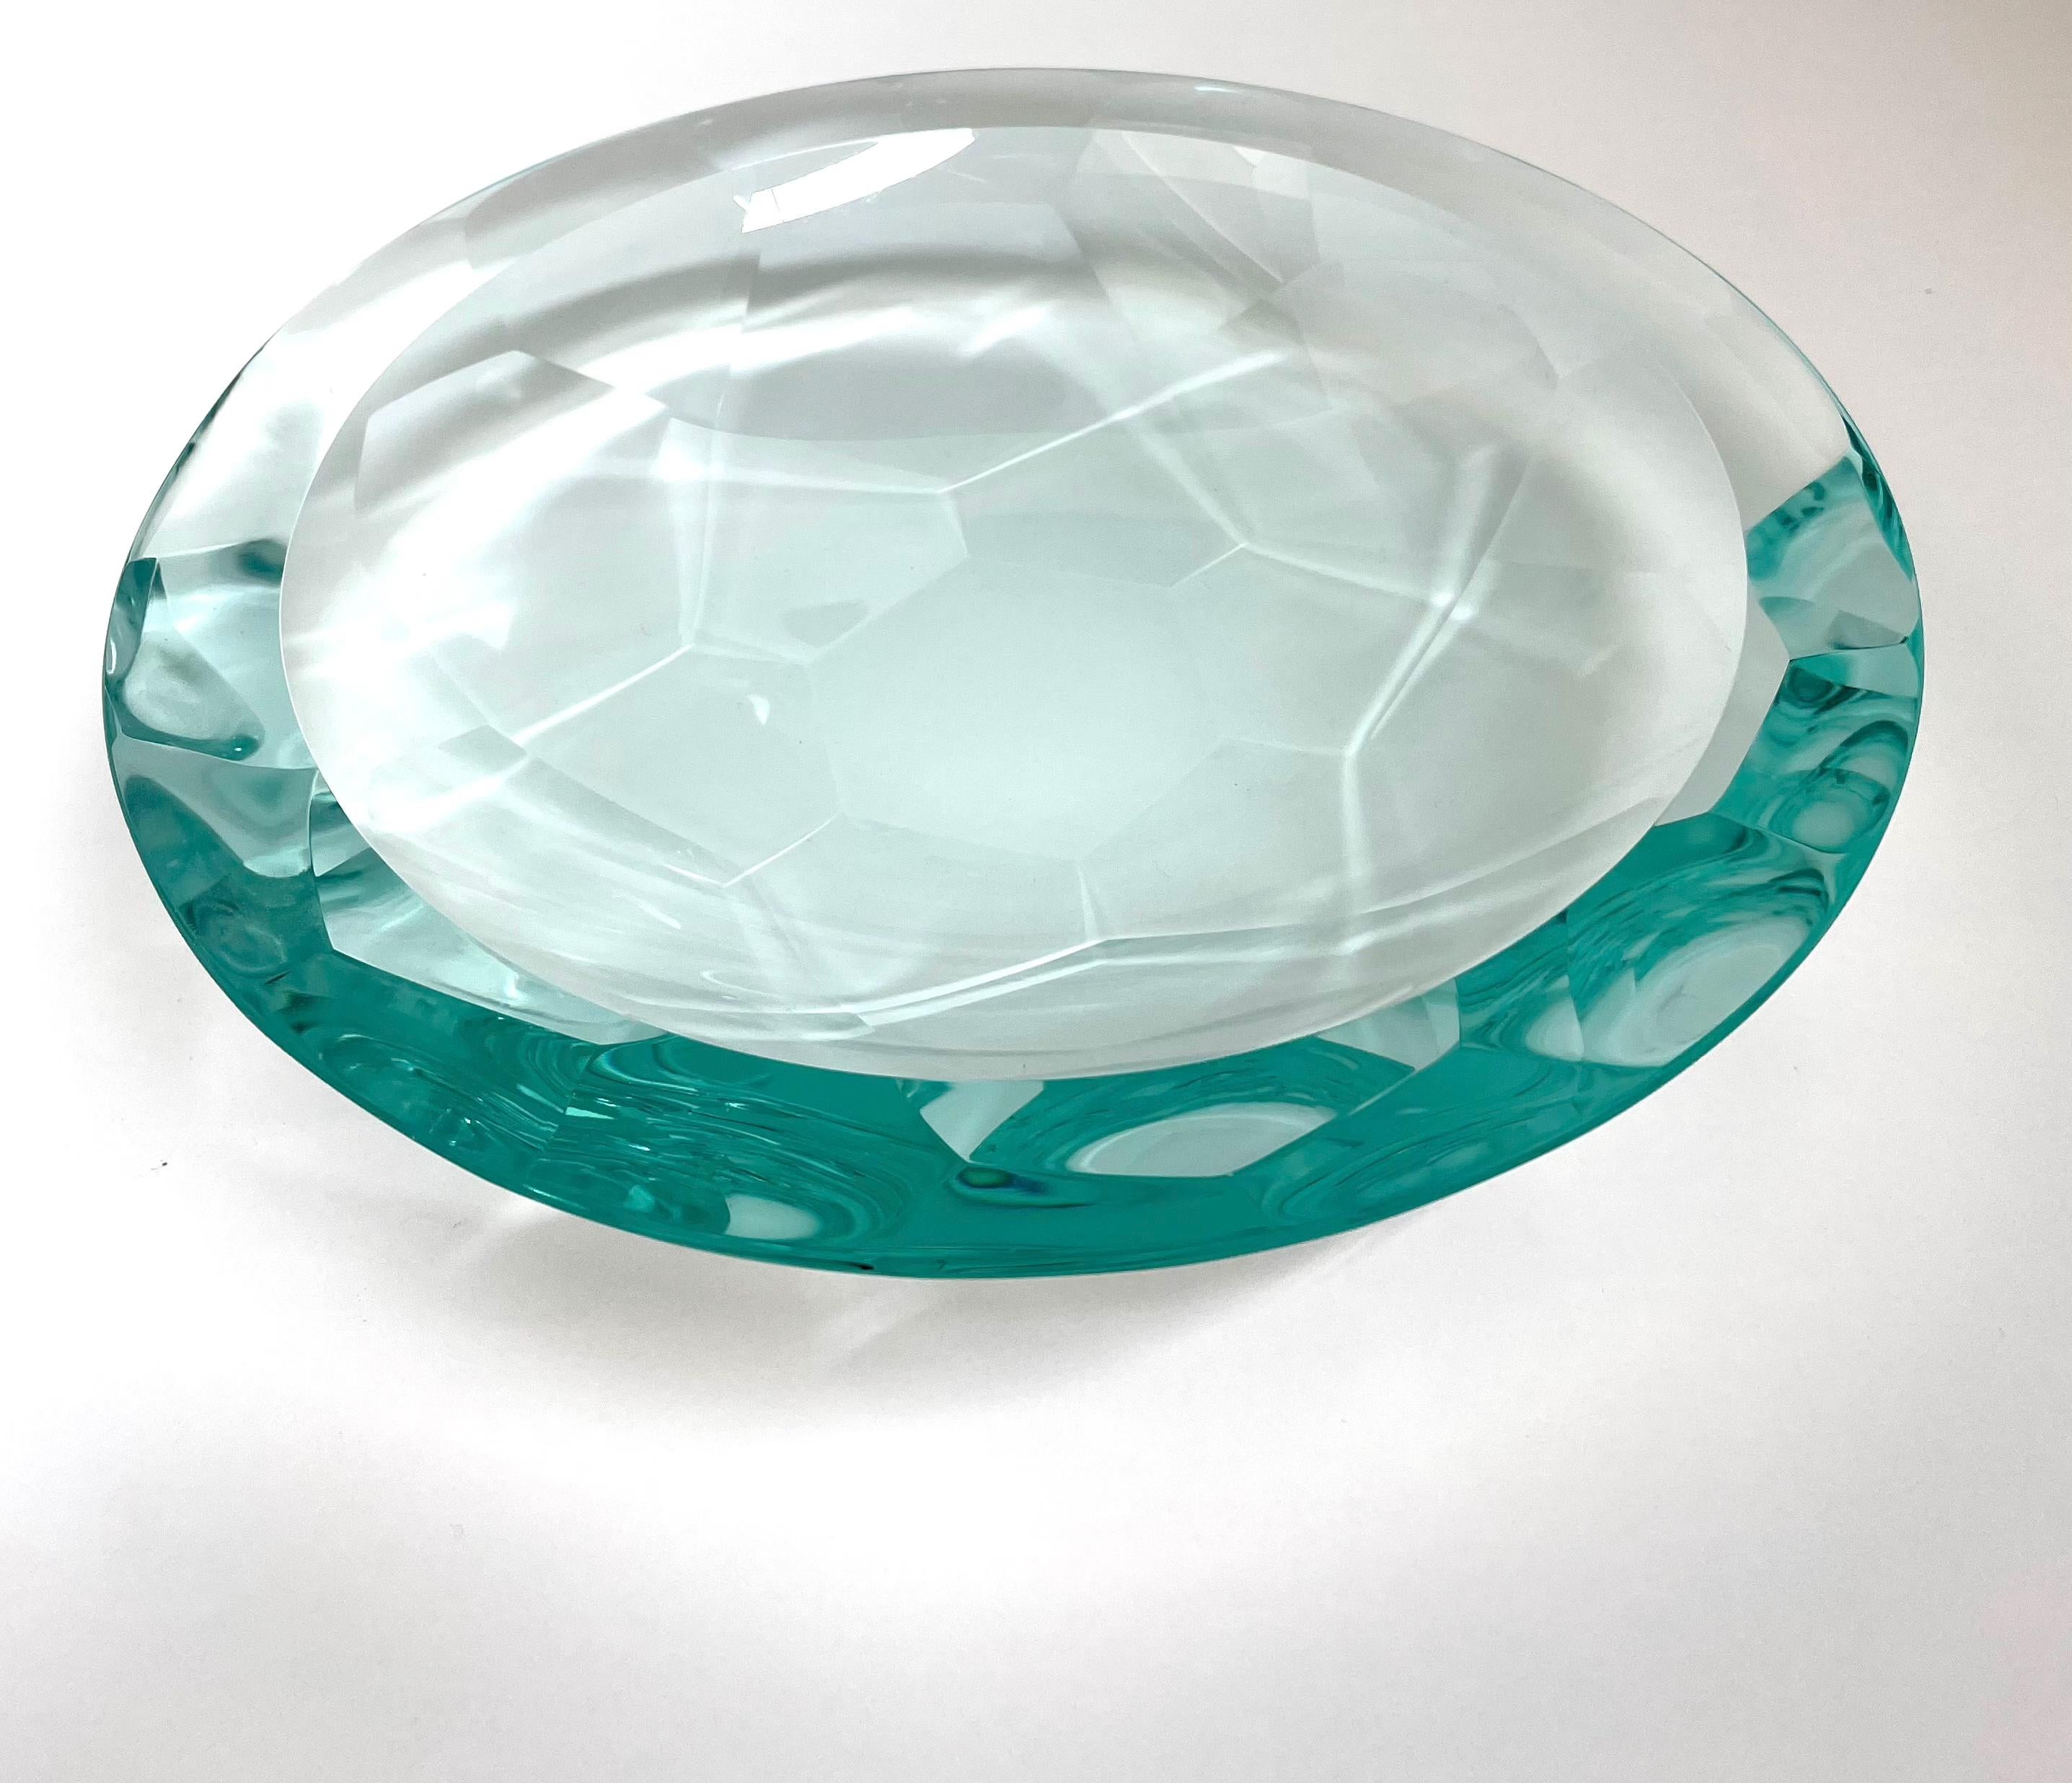 To make this bowl the crystal was curved, ground and polished by hand.
Thanks to a particular grinding technique it was possible to create a geometric pattern made of hexagons and pentagons that recreate the image of a geometric flower.
The crystal